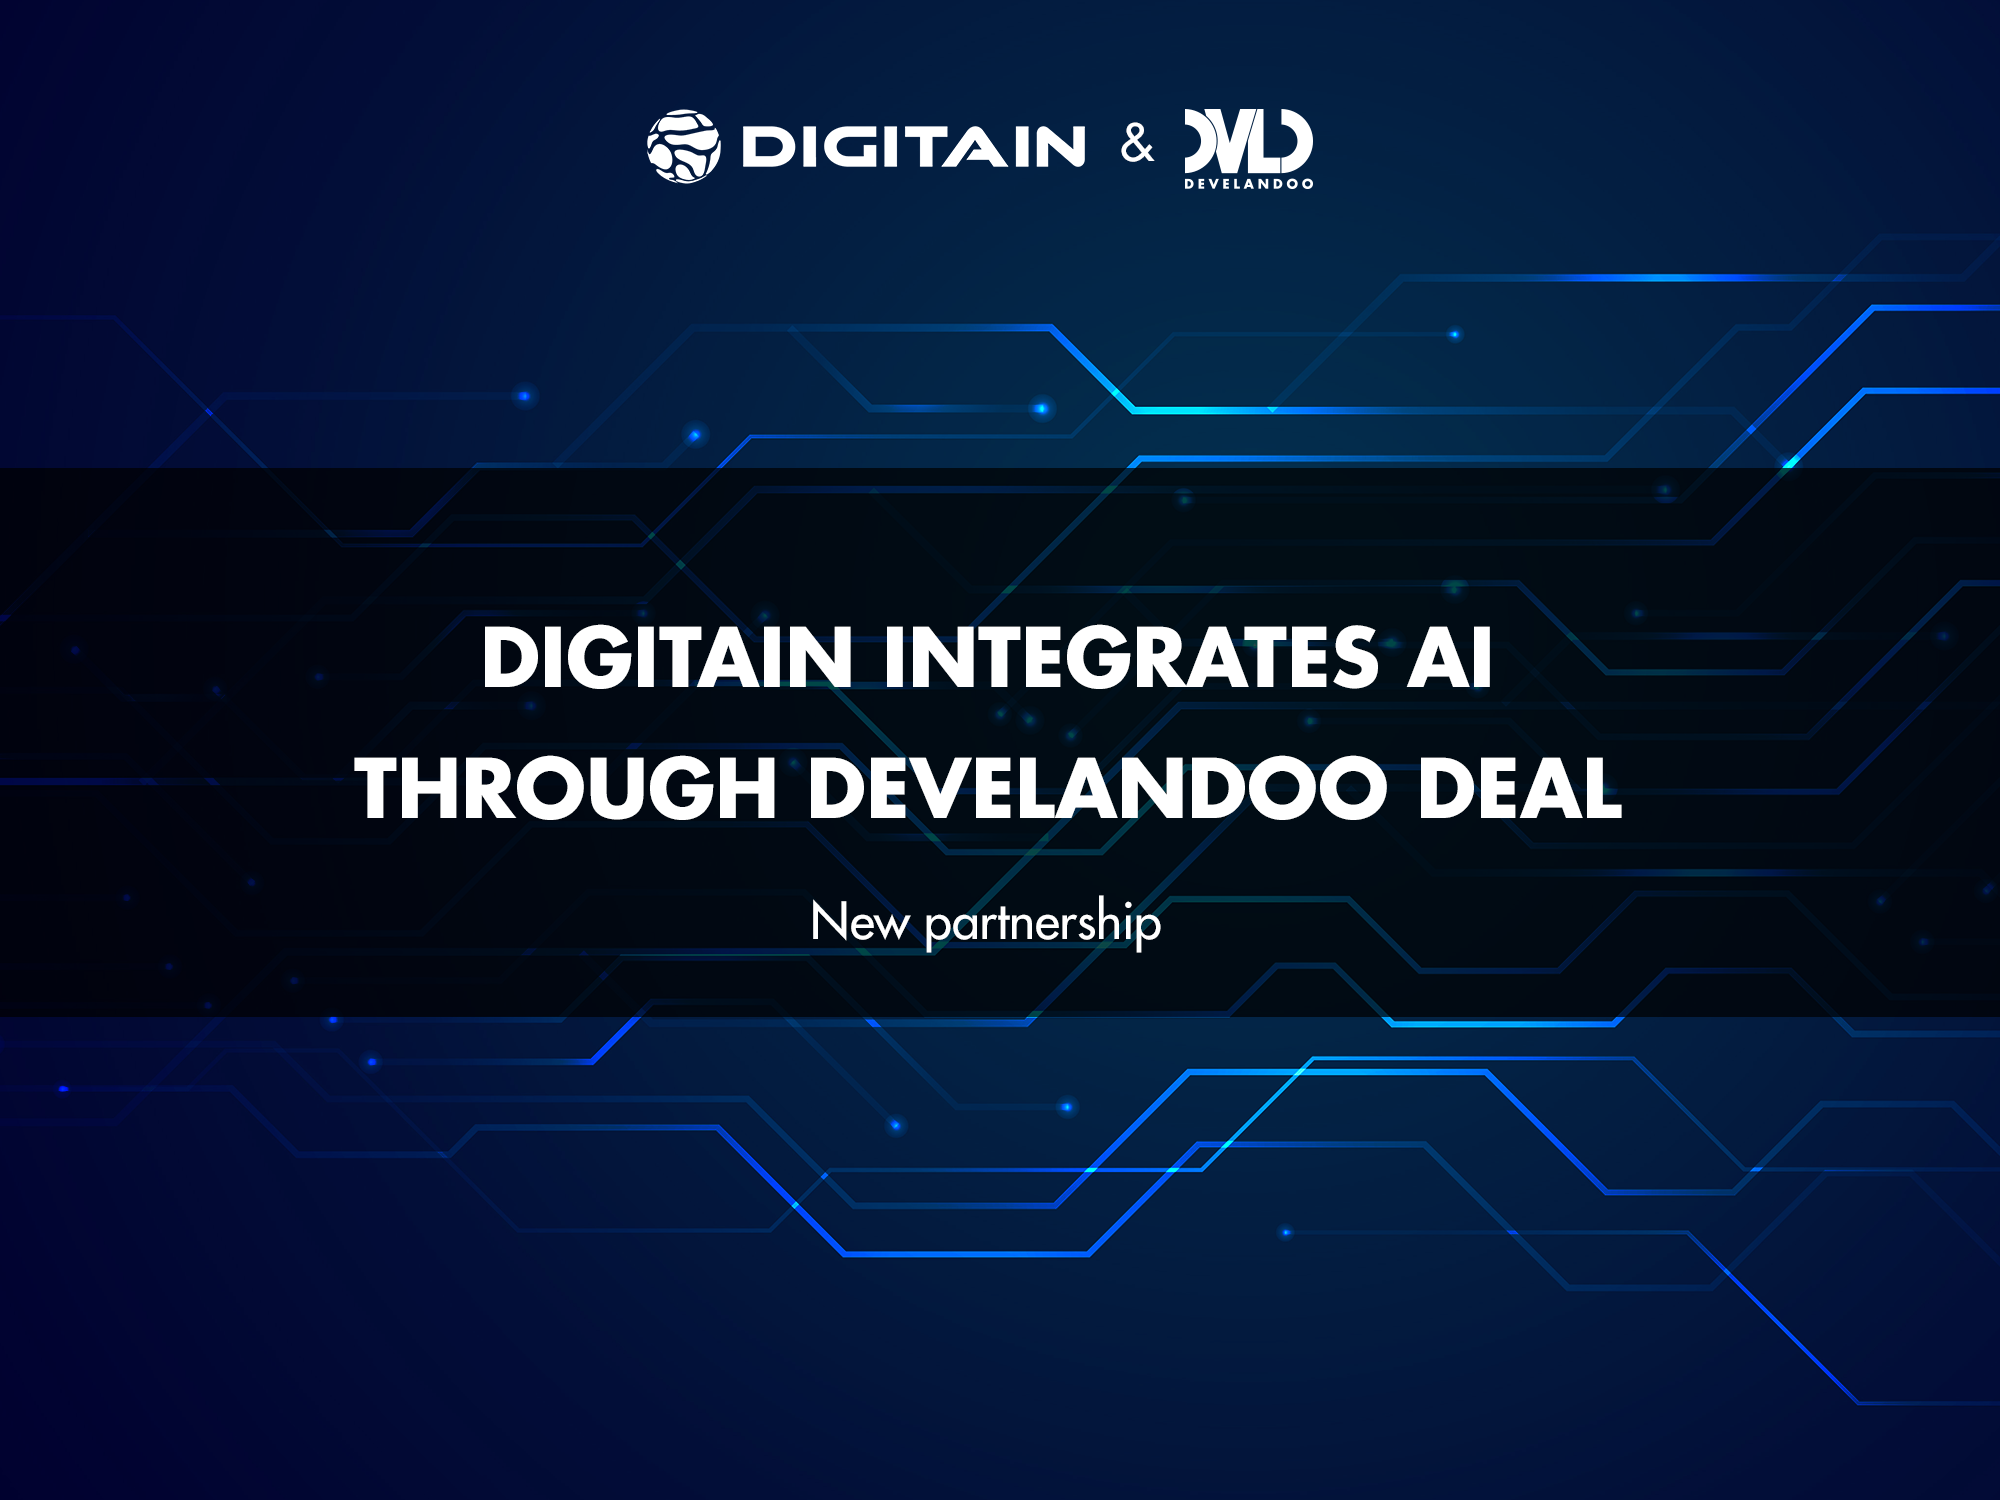 Develandoo’s AI Solutions To Be Integrated onto Digitain’s Platforms